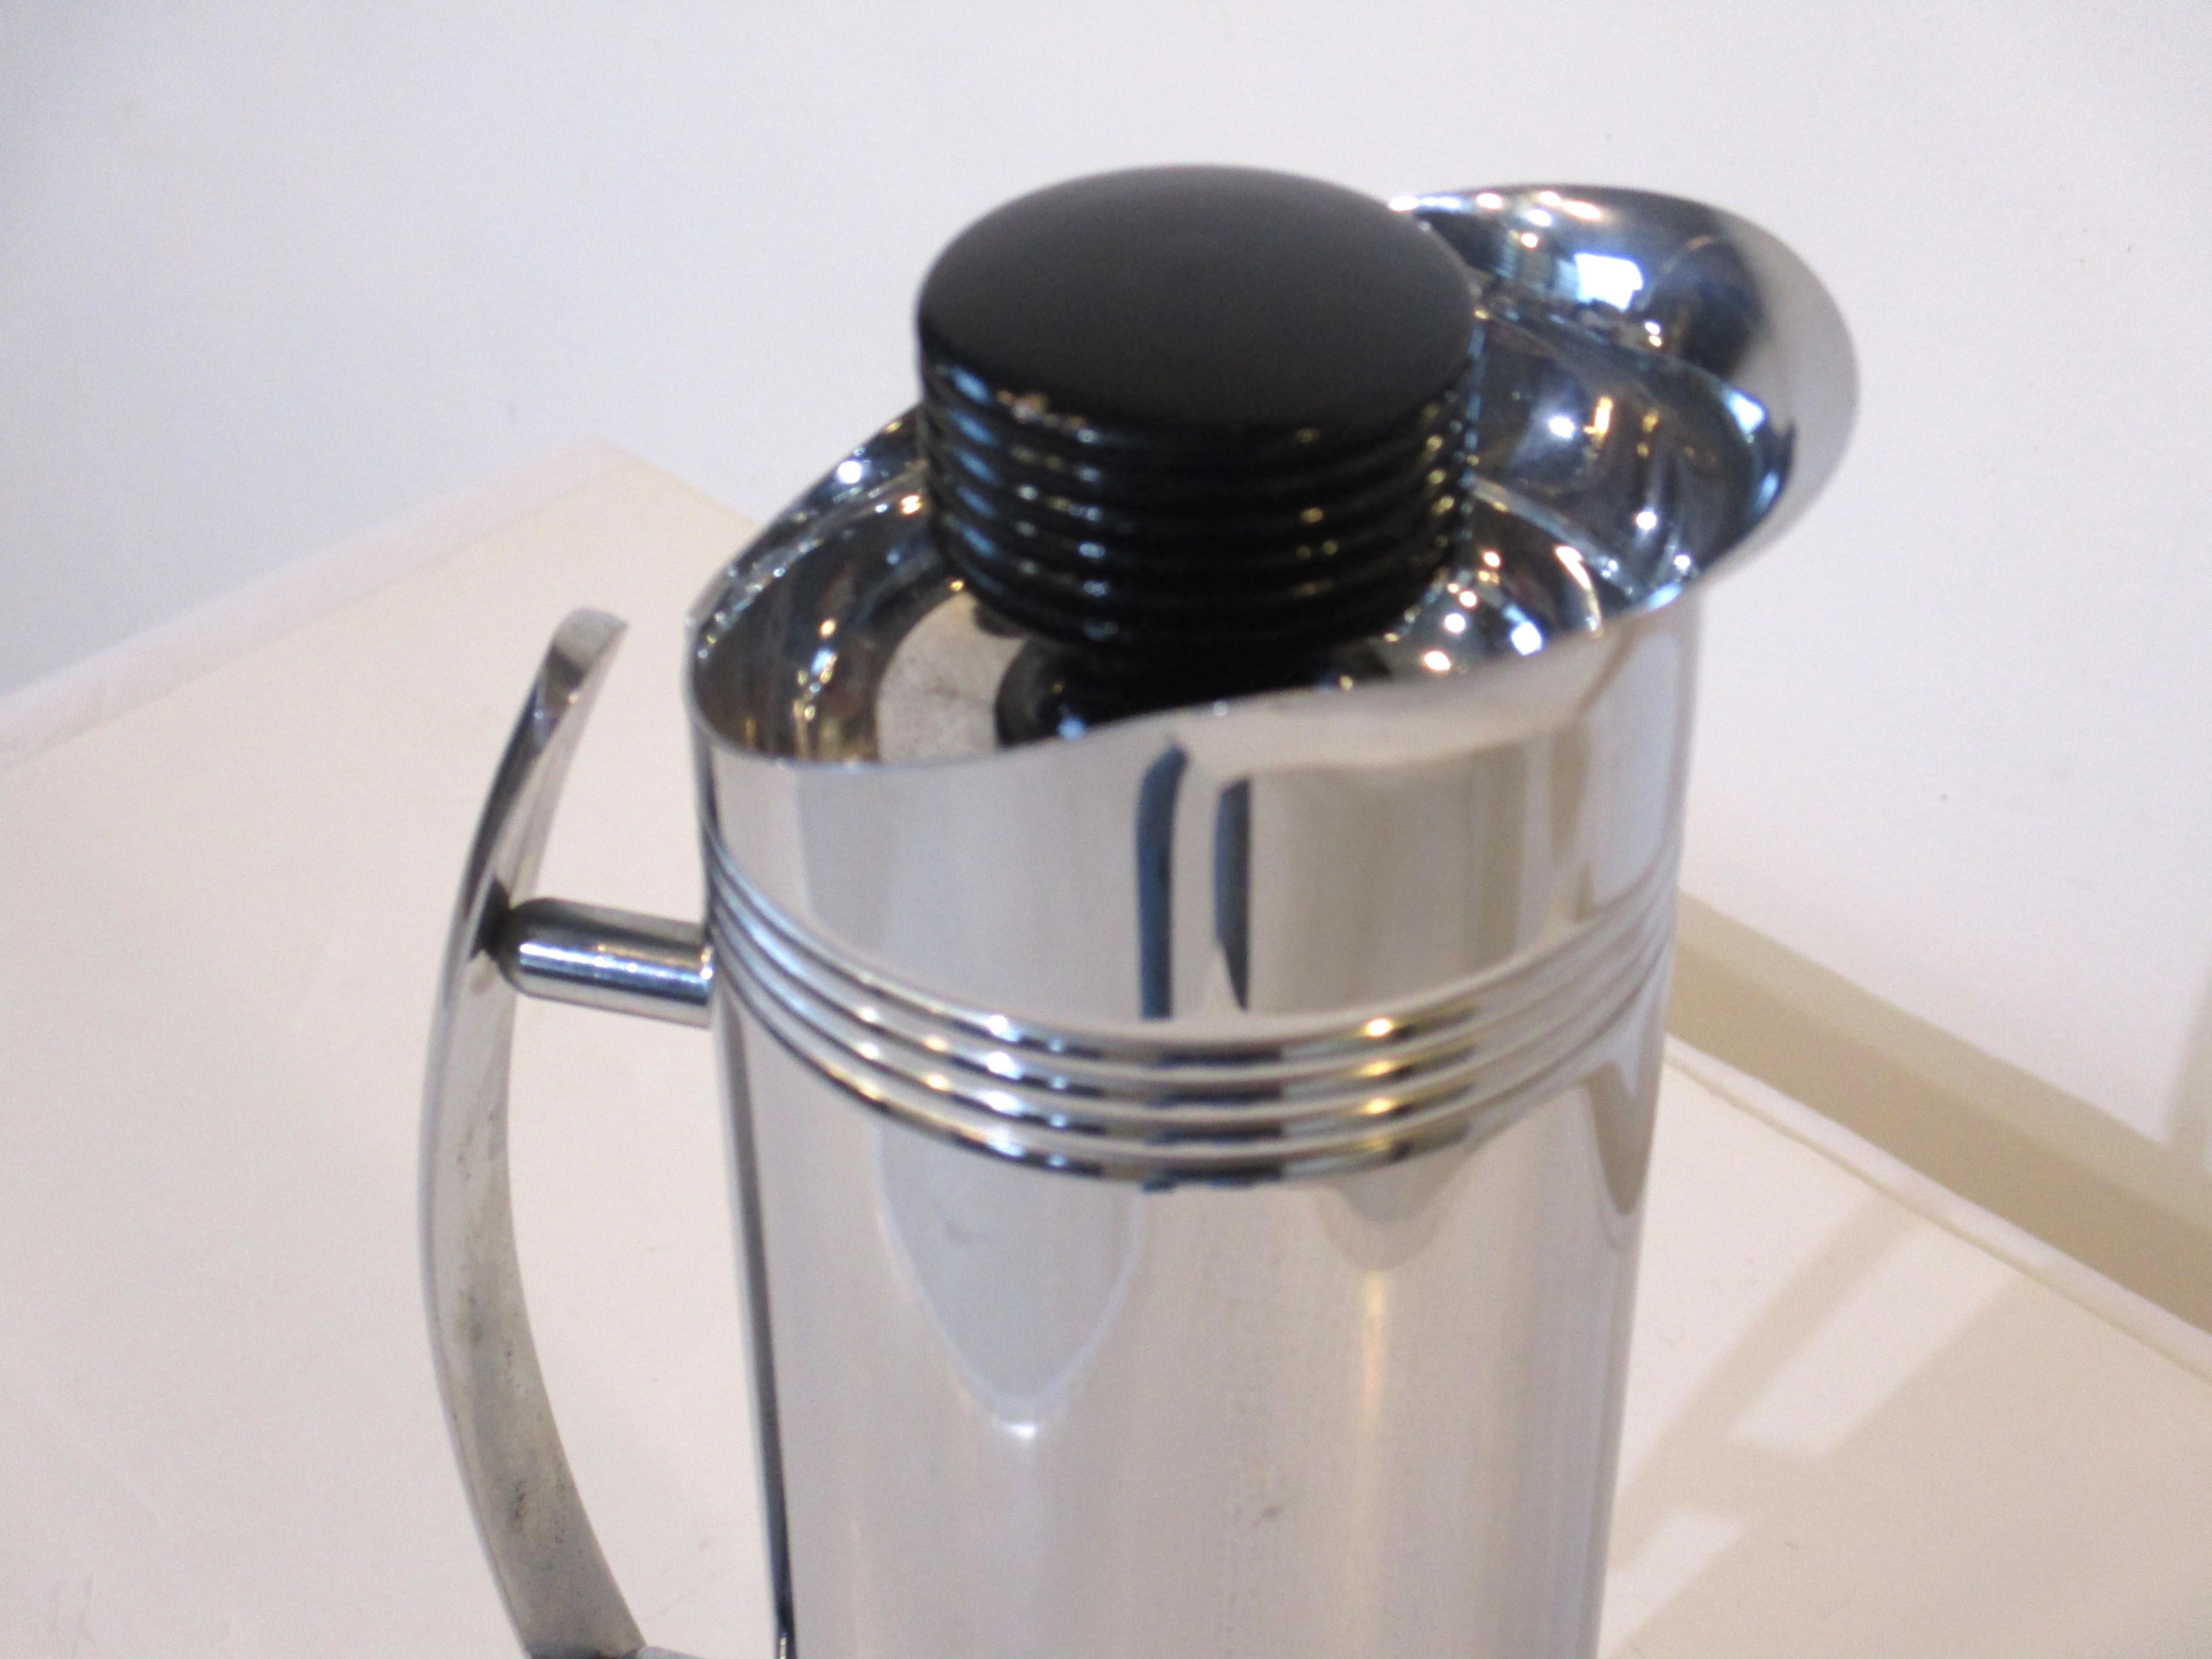 A very stylish chrome cocktail shaker and hot or cold pitcher with curved handle and black ribbed stopper having a cork end . In the manner of Art deco manufactured by the Manning Bowman company.